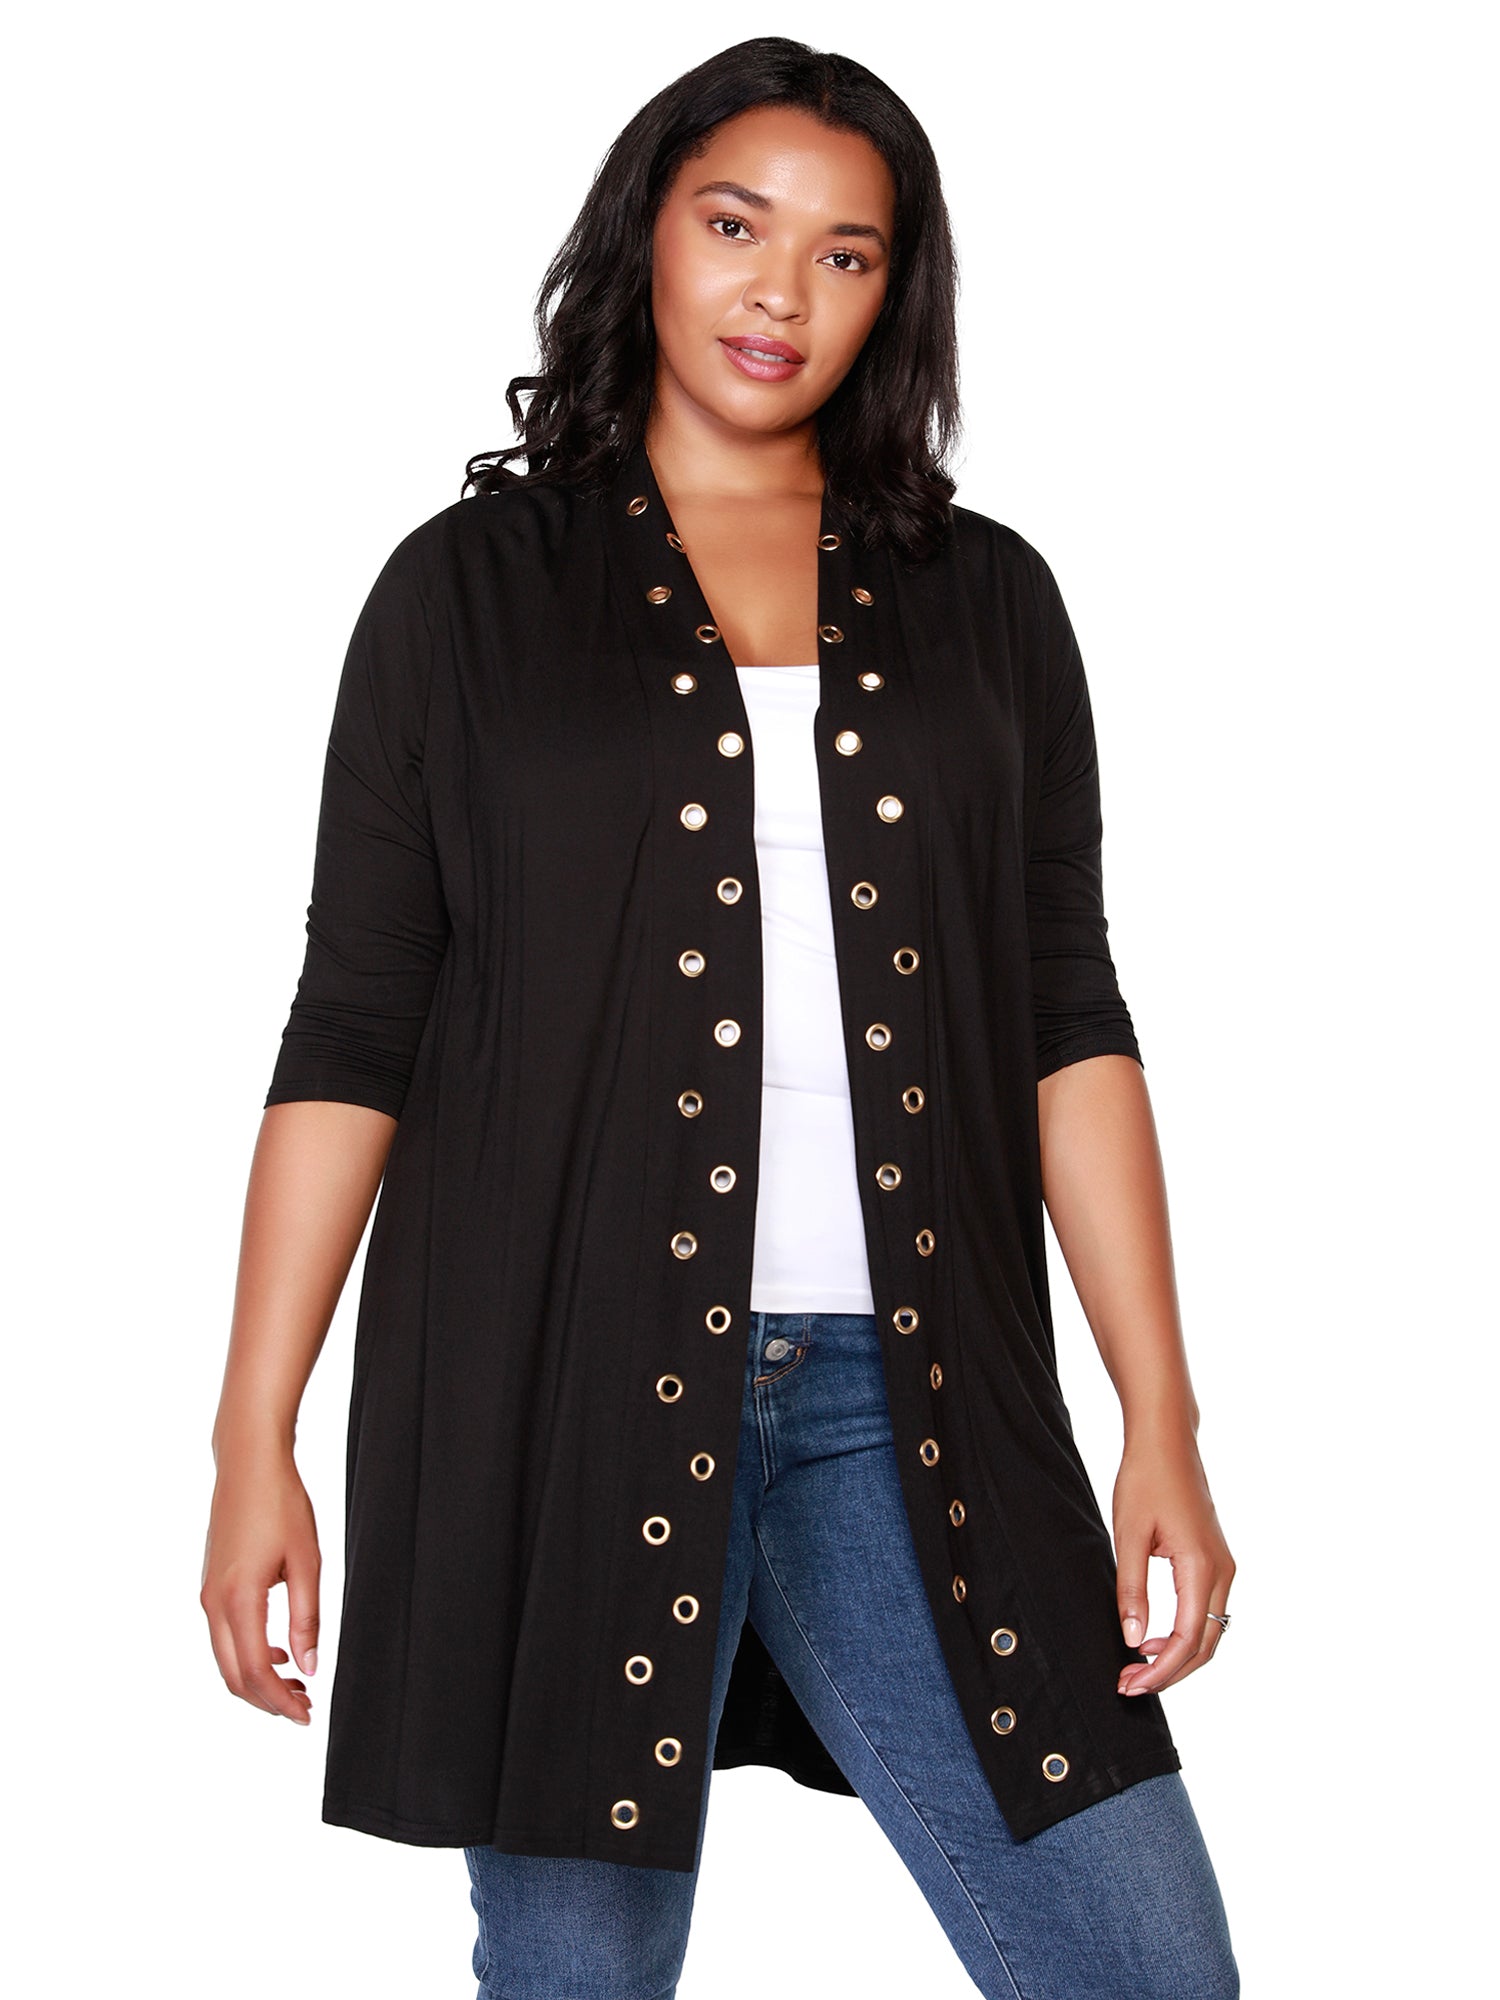 Women's Fashion Cardigan in a Soft Light Knit with 3/4 Sleeves and Grommet Trim | Curvy